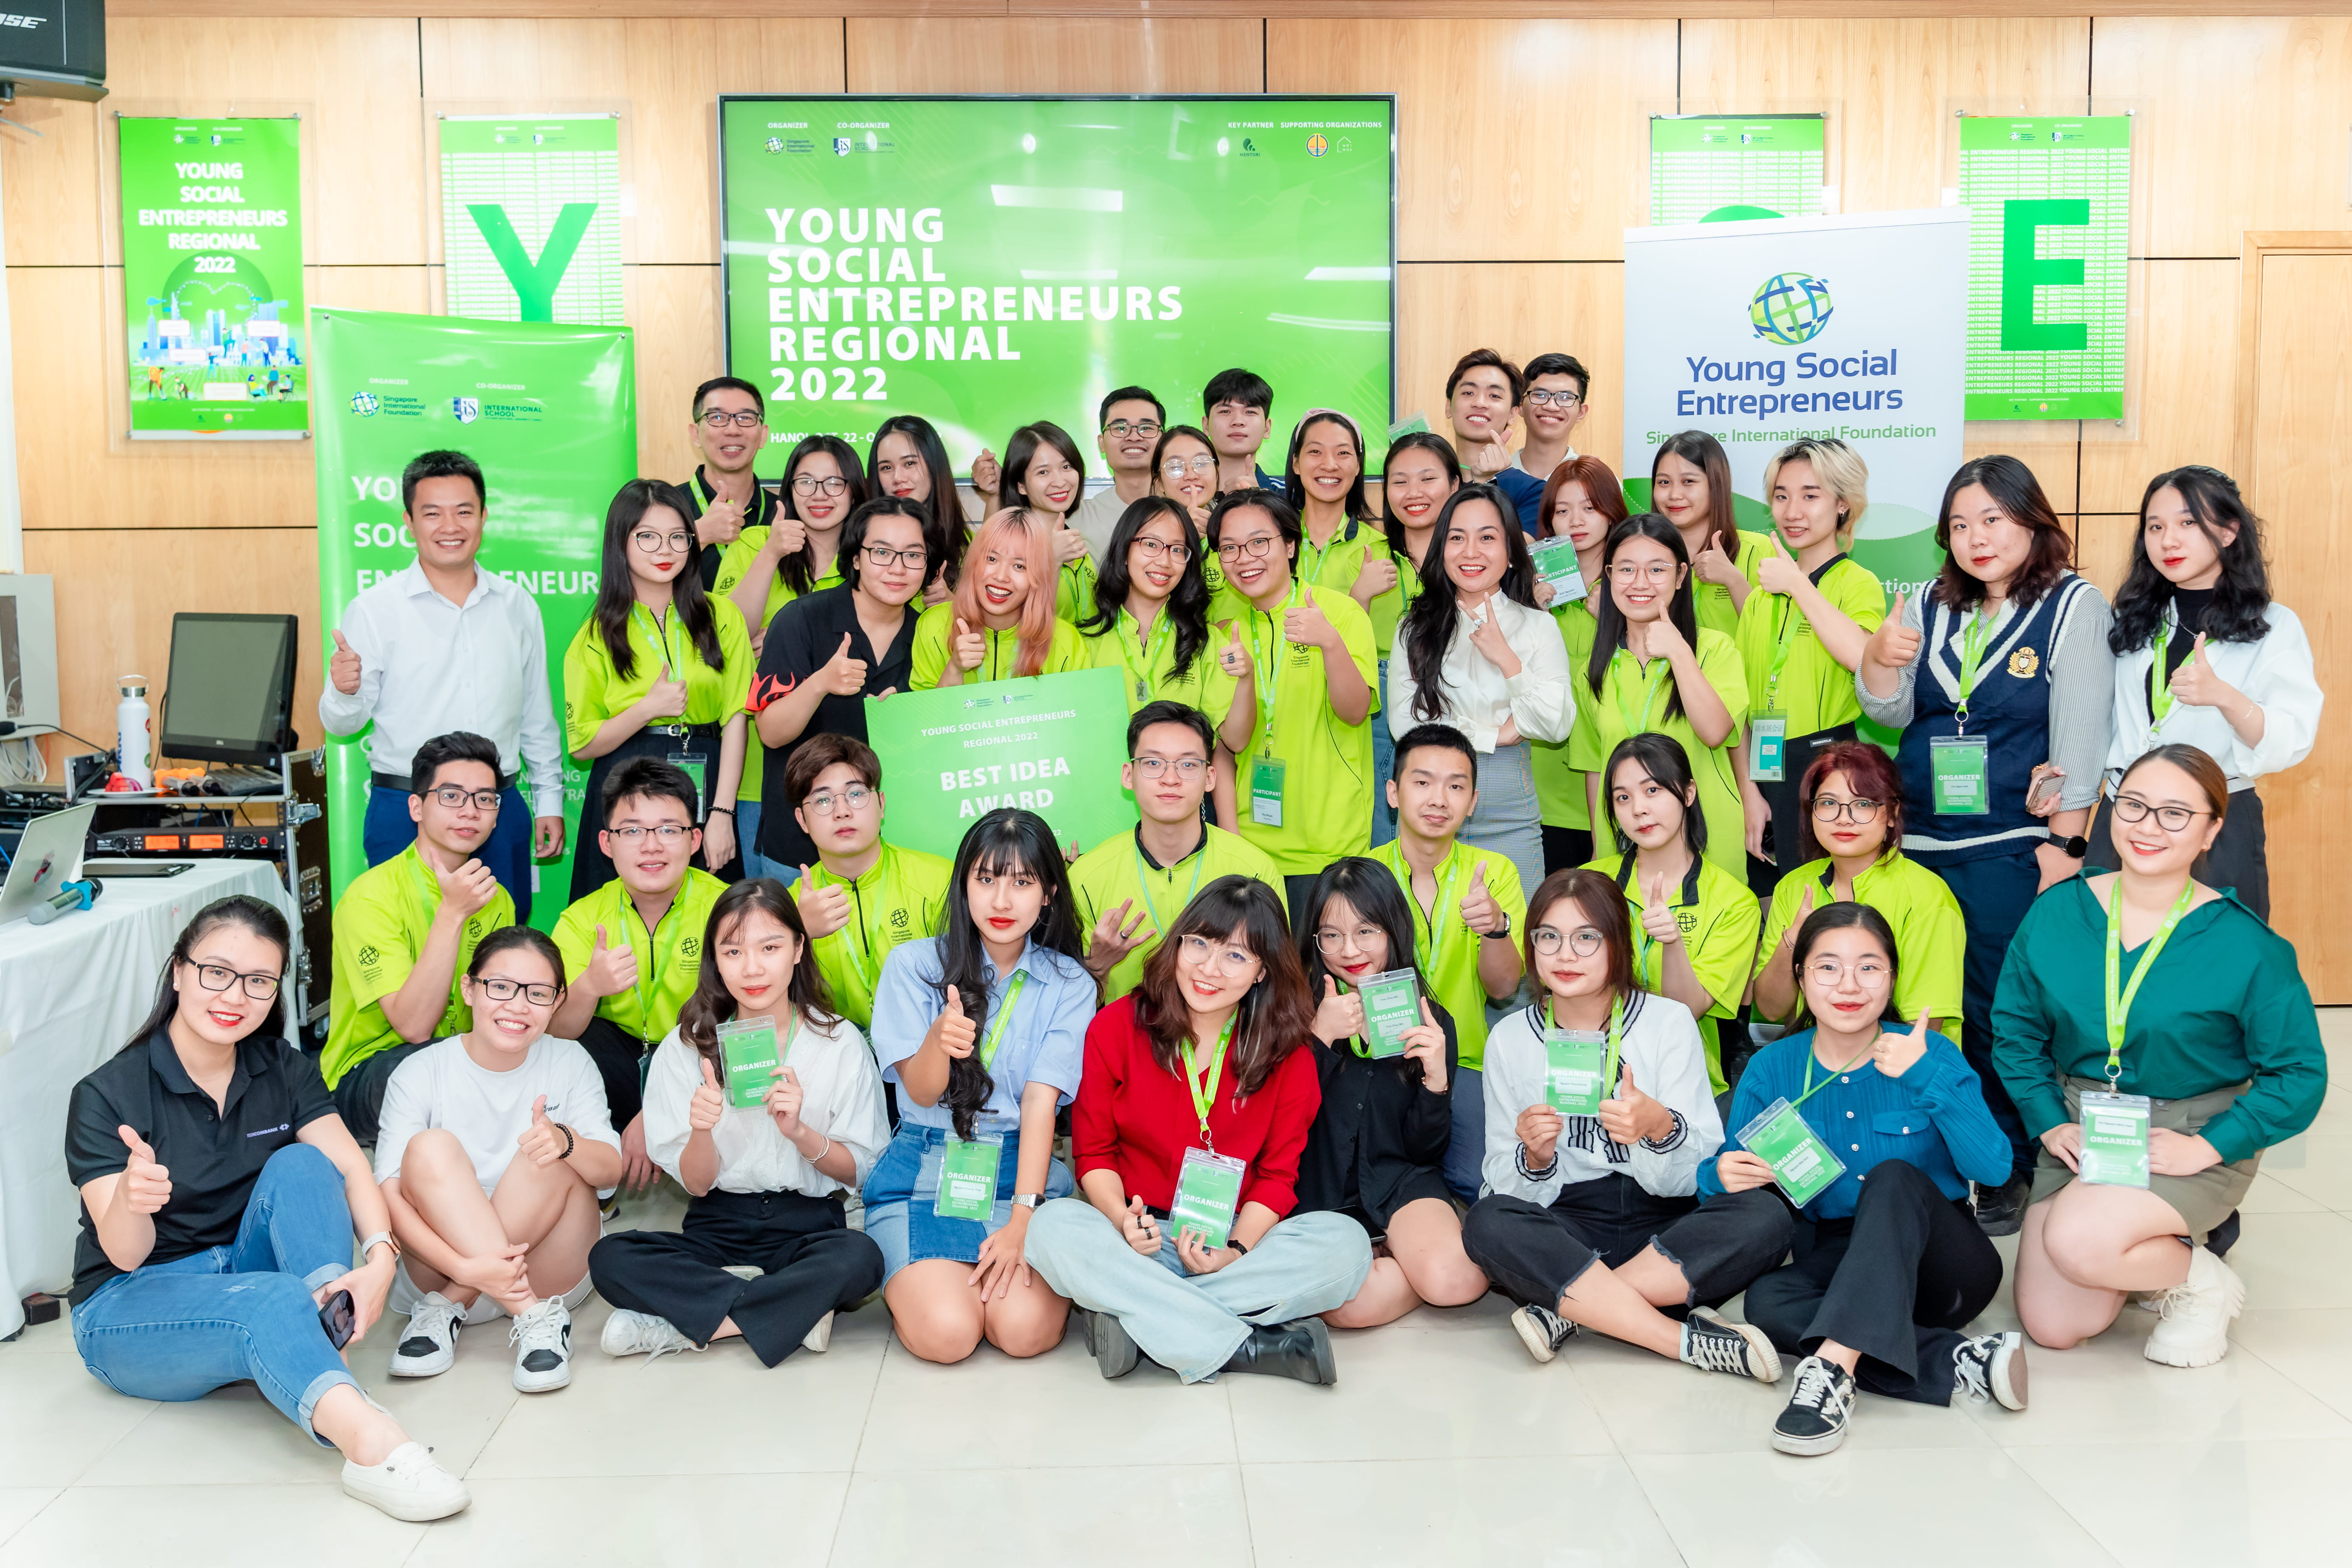 The two-day workshop brings together 26 Vietnamese youths to boost their ability to start their social enterprises.